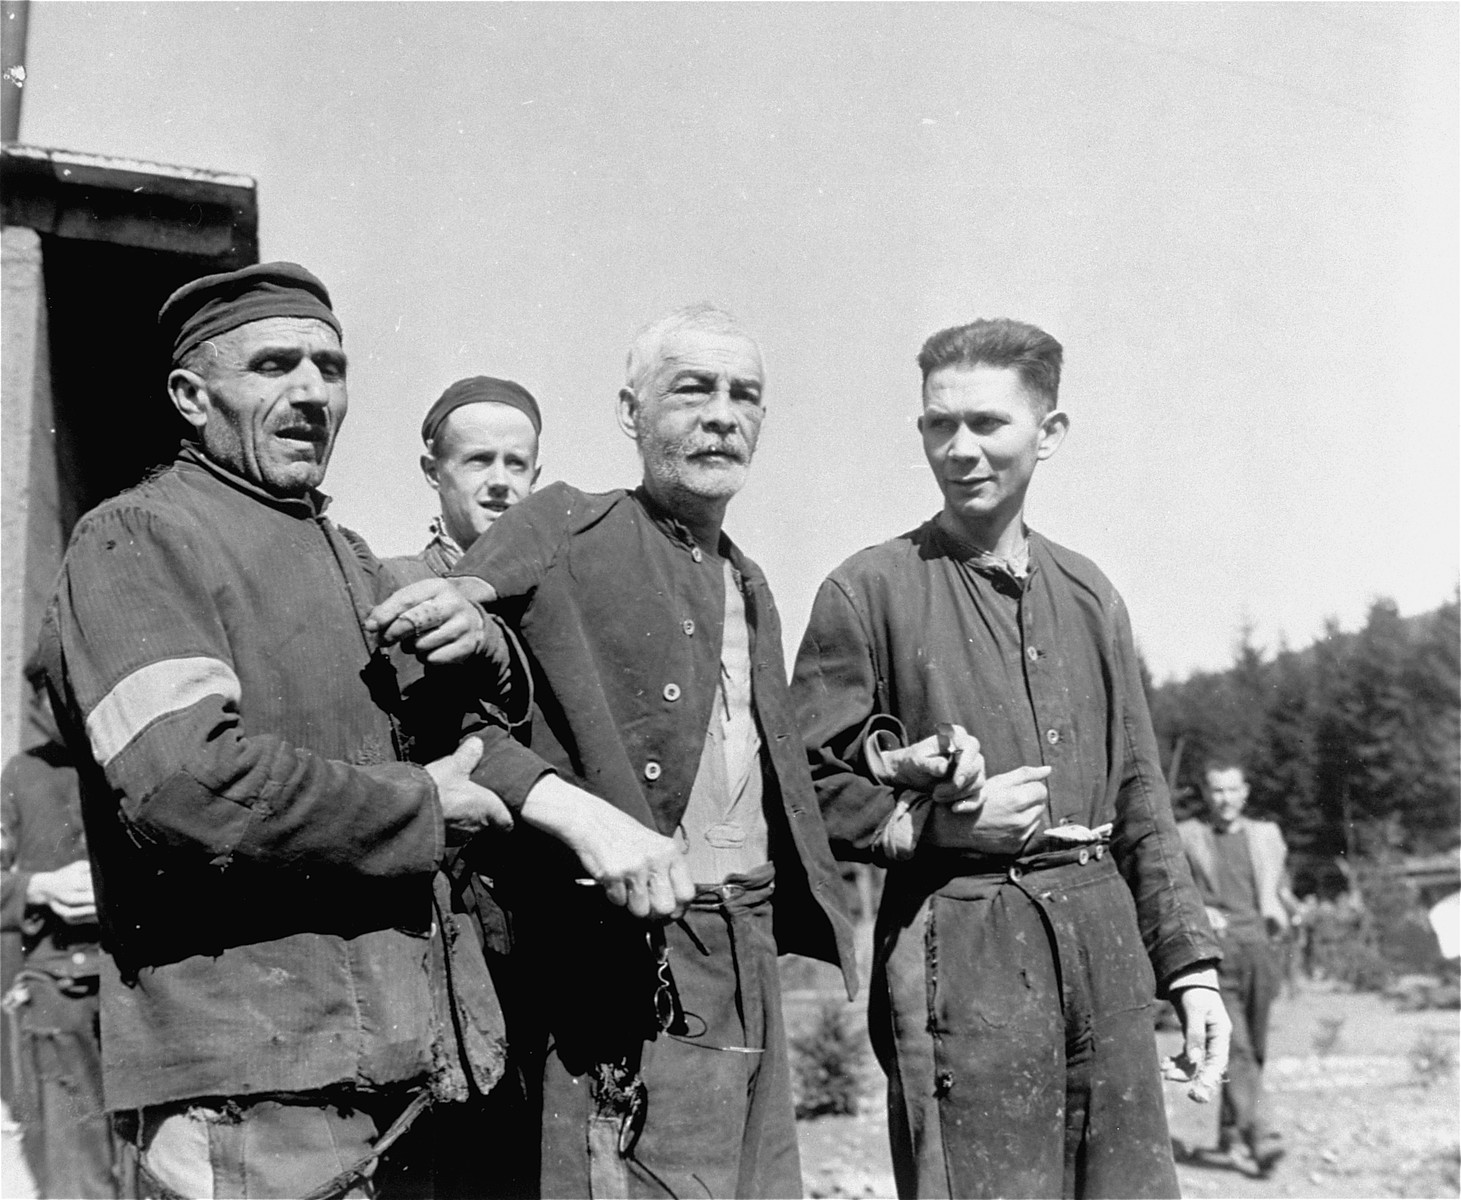 Two fellow prisoners support a weak and elderly Jewish man in the concentration camp at Holzen, Germany. These prisoners, subject to starvation, beatings, and disease, were liberated by units of the 9th U.S. Army.